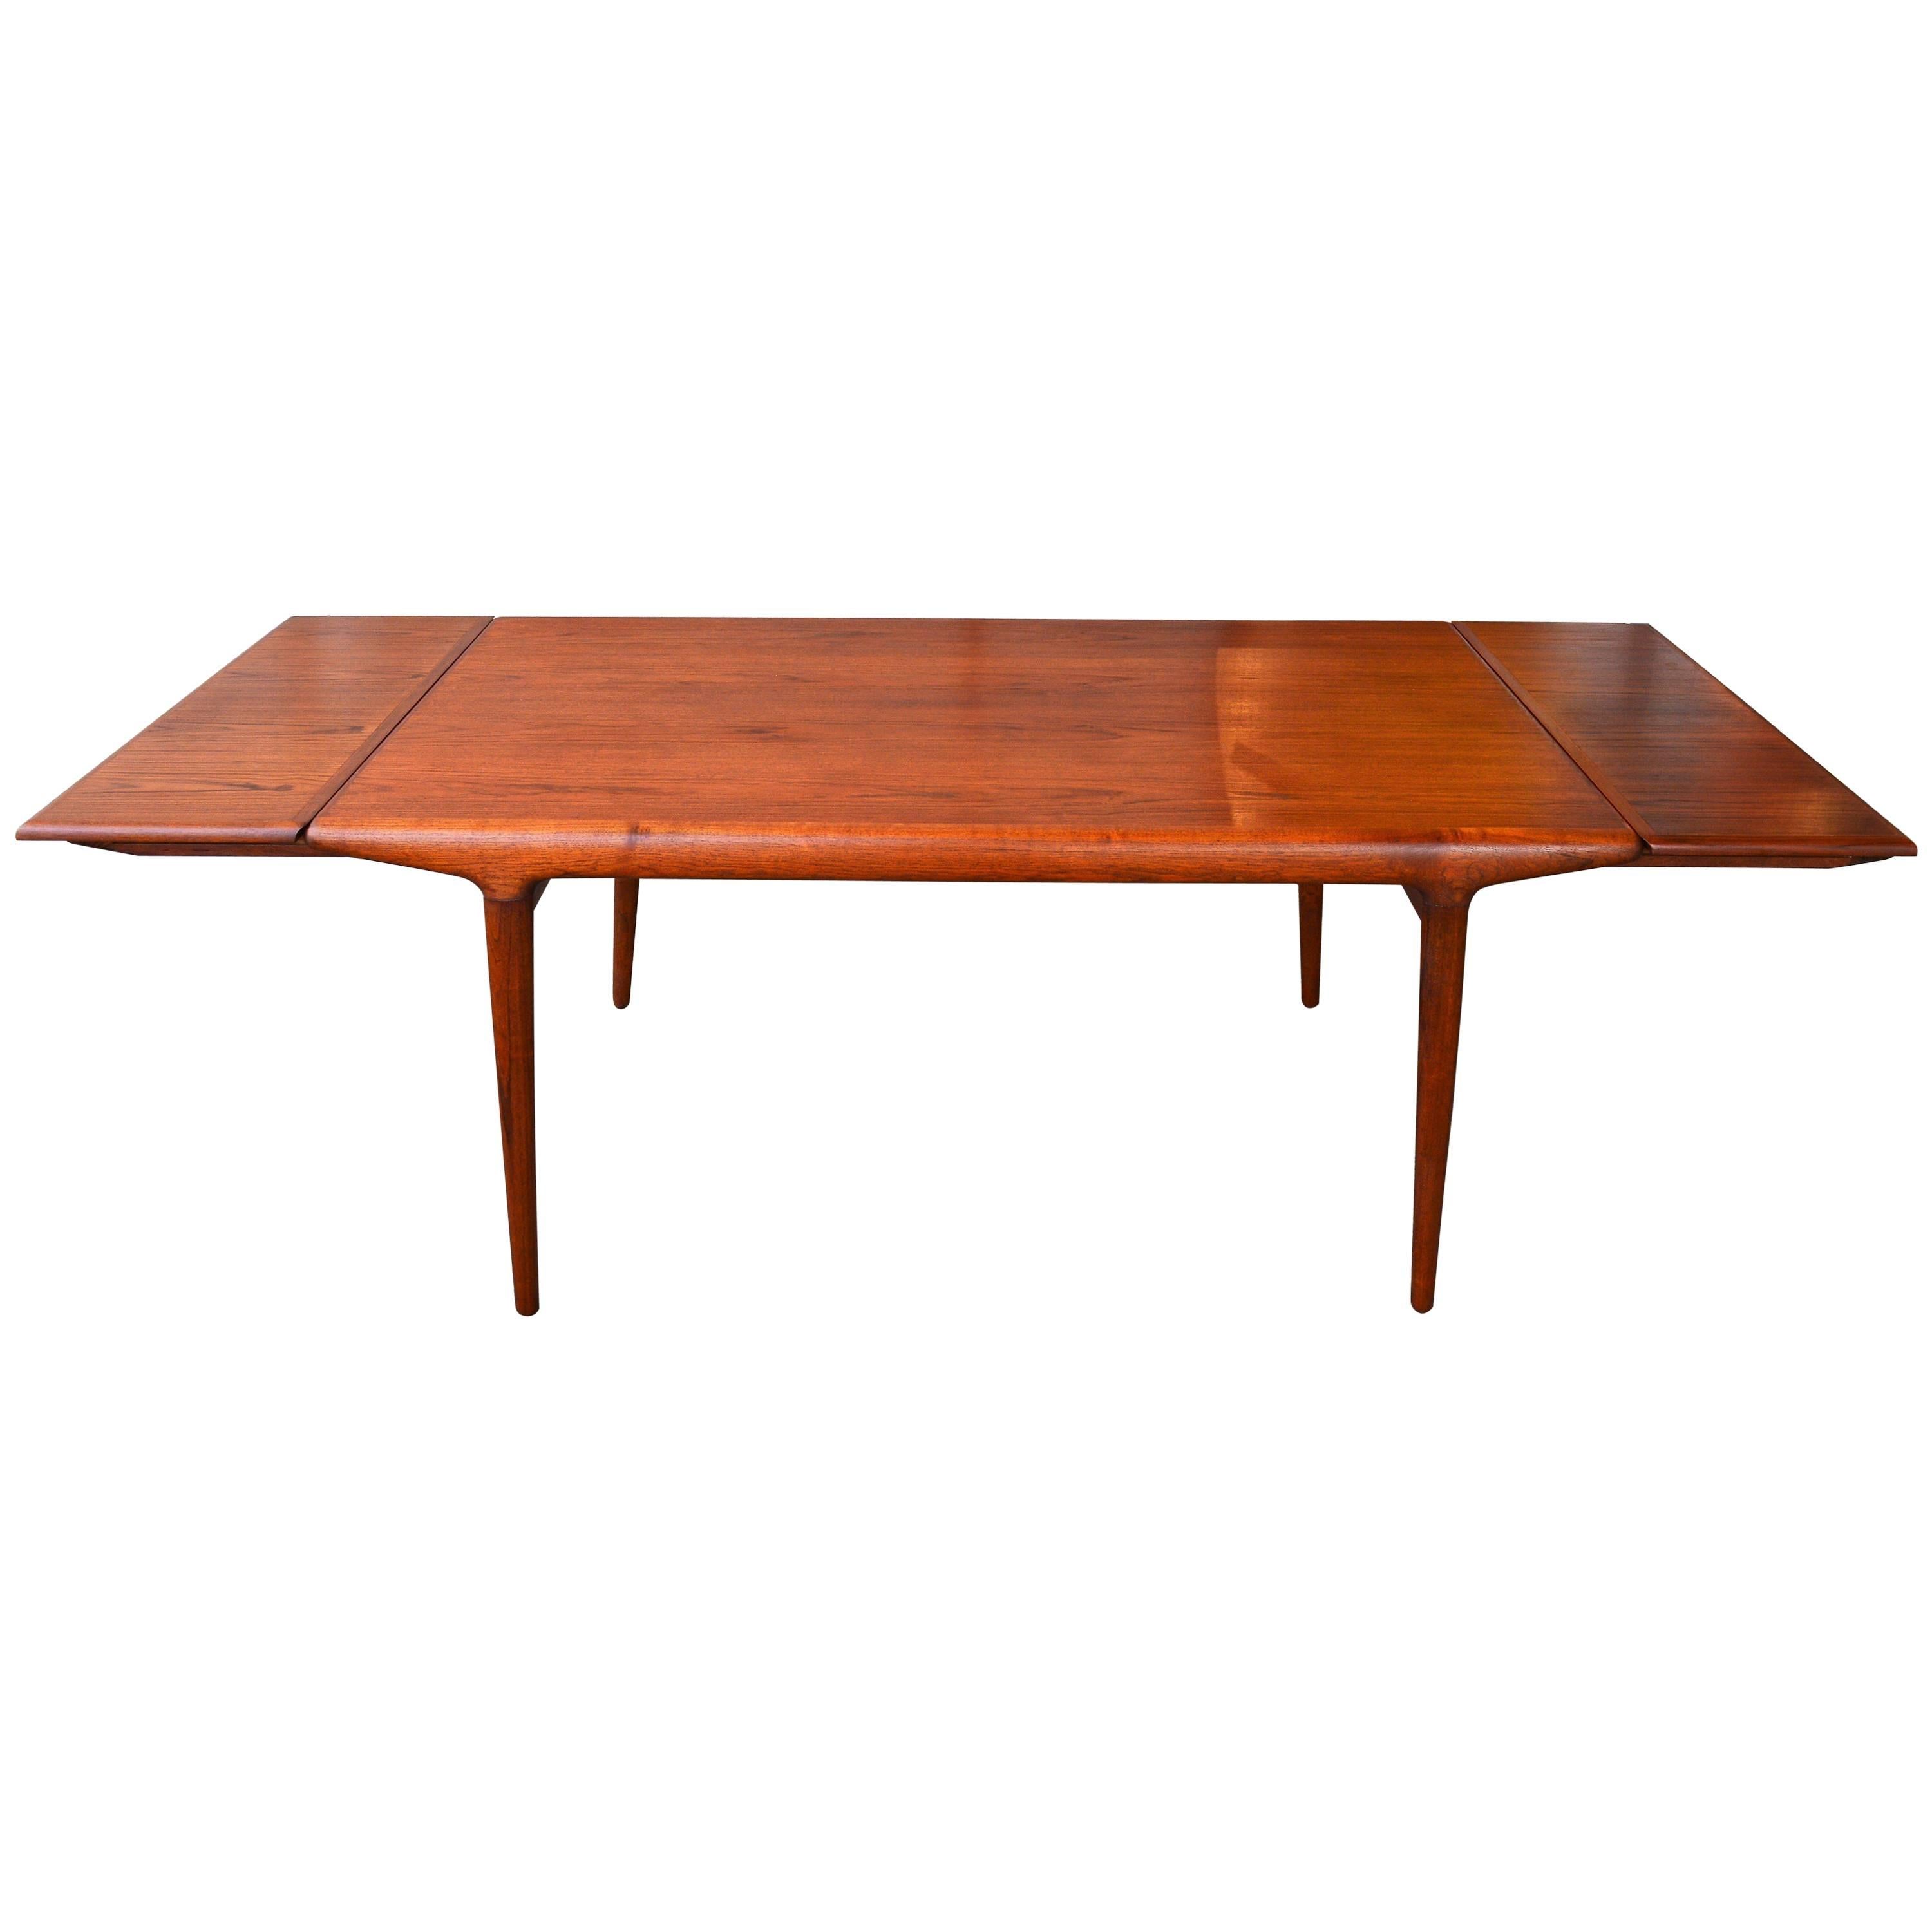 Niels Otto Moller for J.L. Moller Teak Dining Table with Extension Leaves, 1960s